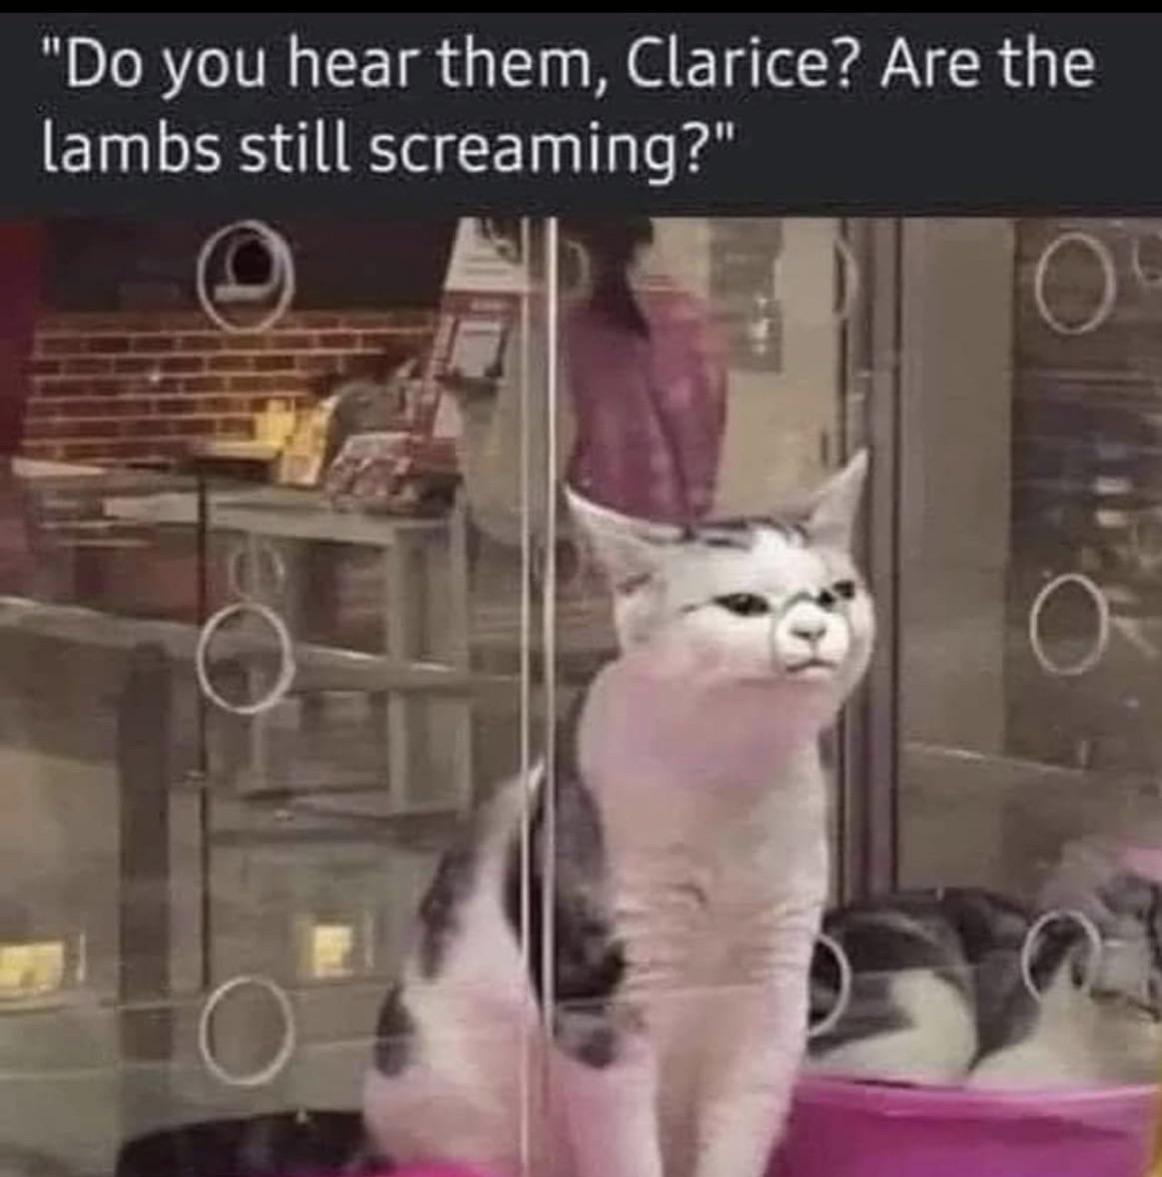 funny memes and tweets - photo caption - "Do you hear them, Clarice? Are the lambs still screaming?"